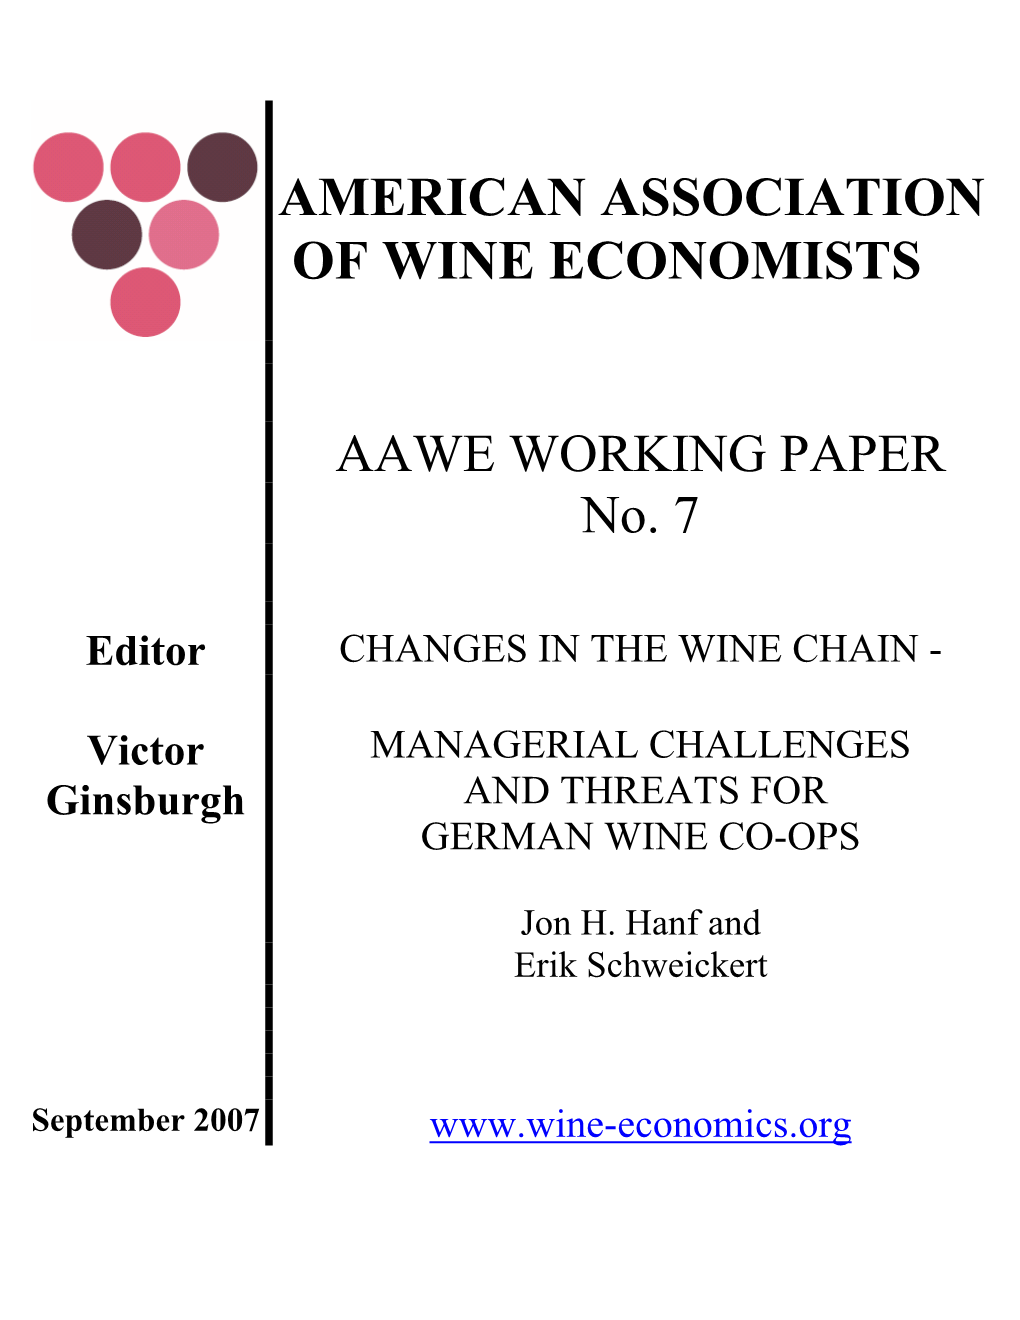 AAWE WORKING PAPER No. 7